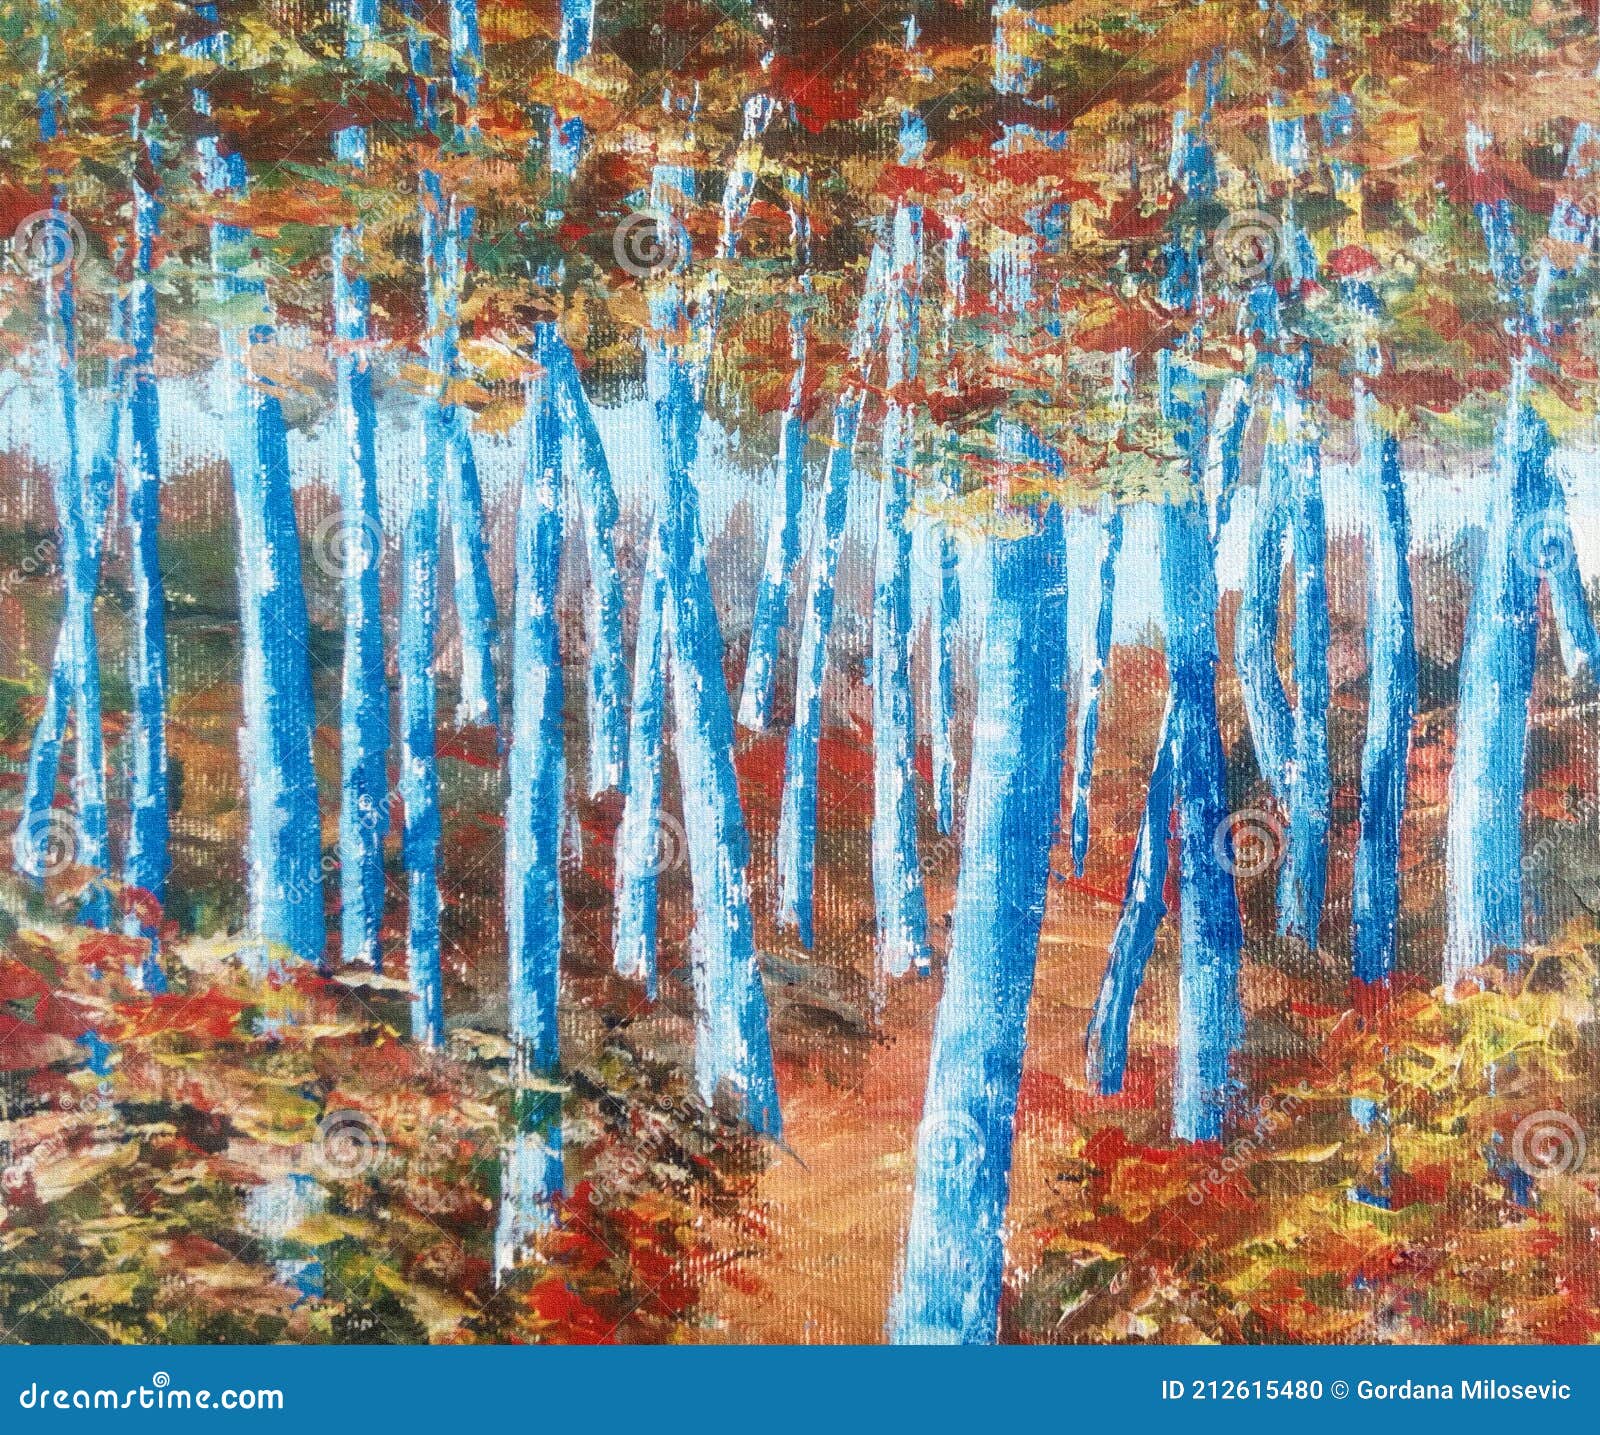 Acrylic Painting on Canvas - The Blue Tree